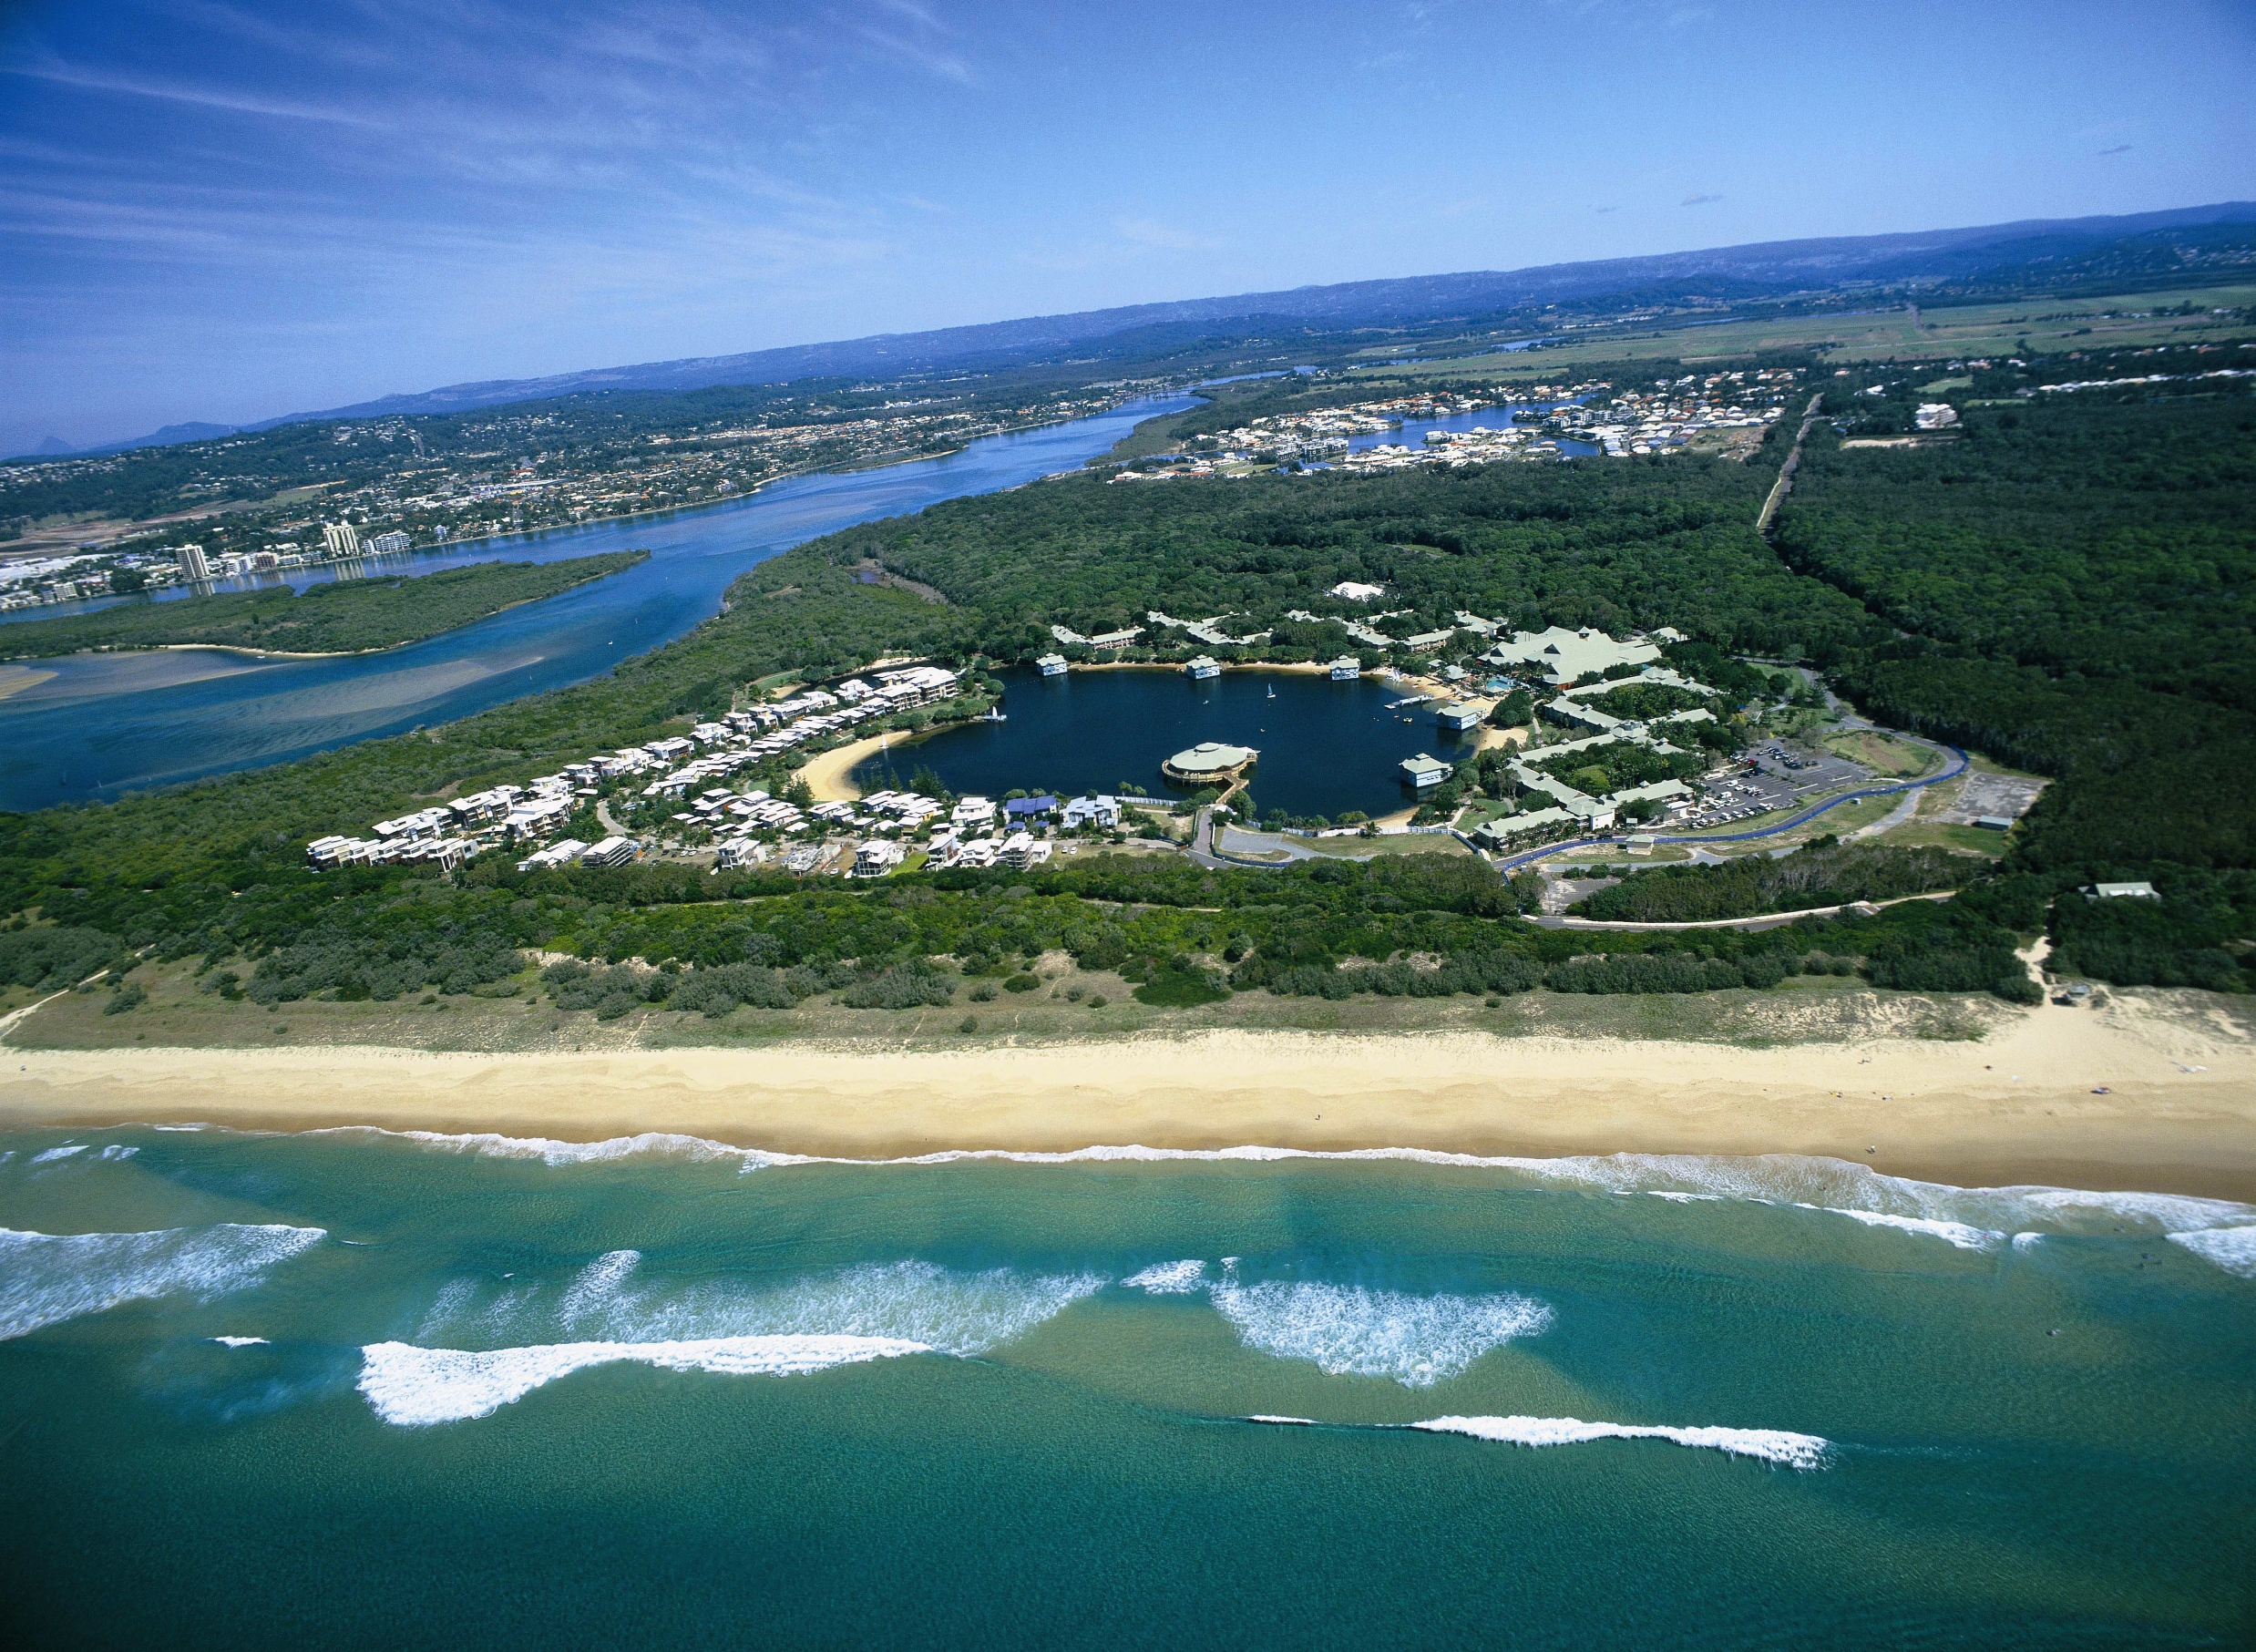 Sunshine Coast to host Queensland’s largest tourism industry gathering